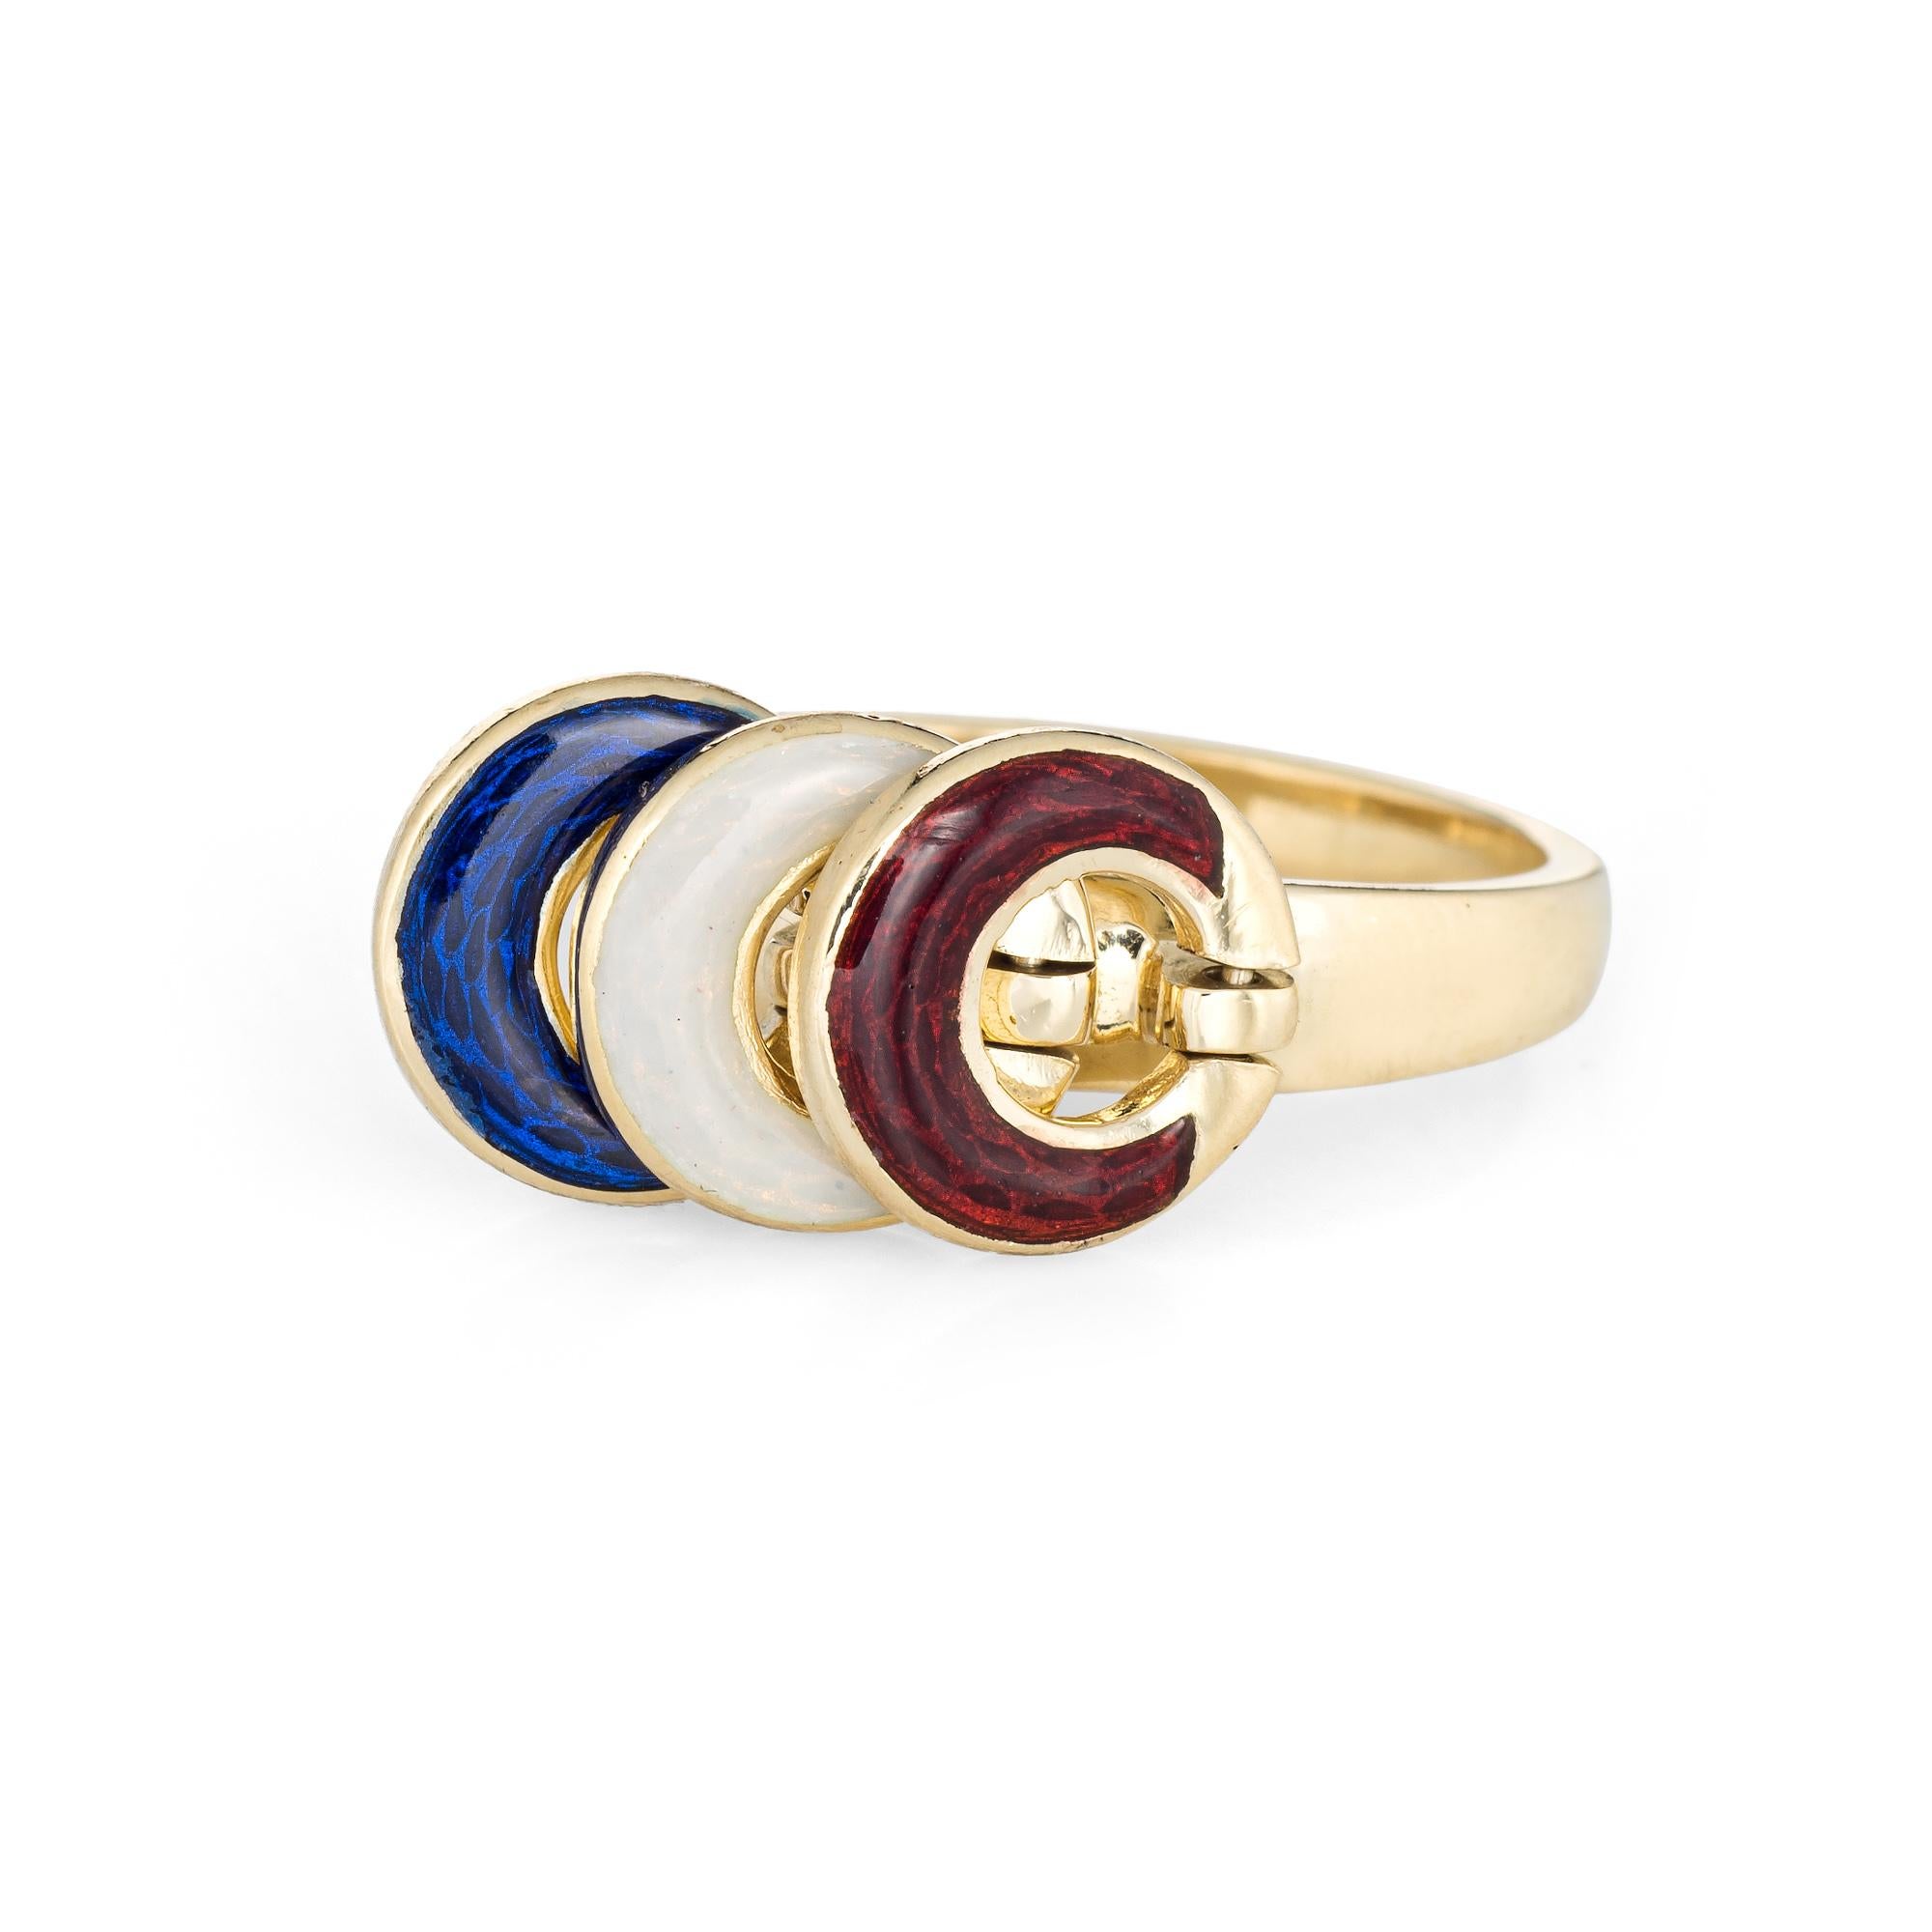 Stylish vintage enamel ring (circa 1970s to 1980s) crafted in 18 karat yellow gold. 

Red, white and blue enamel is set onto three circular mounts. The enamel is in excellent condition and free of cracks or chips. 

The ring features three movable